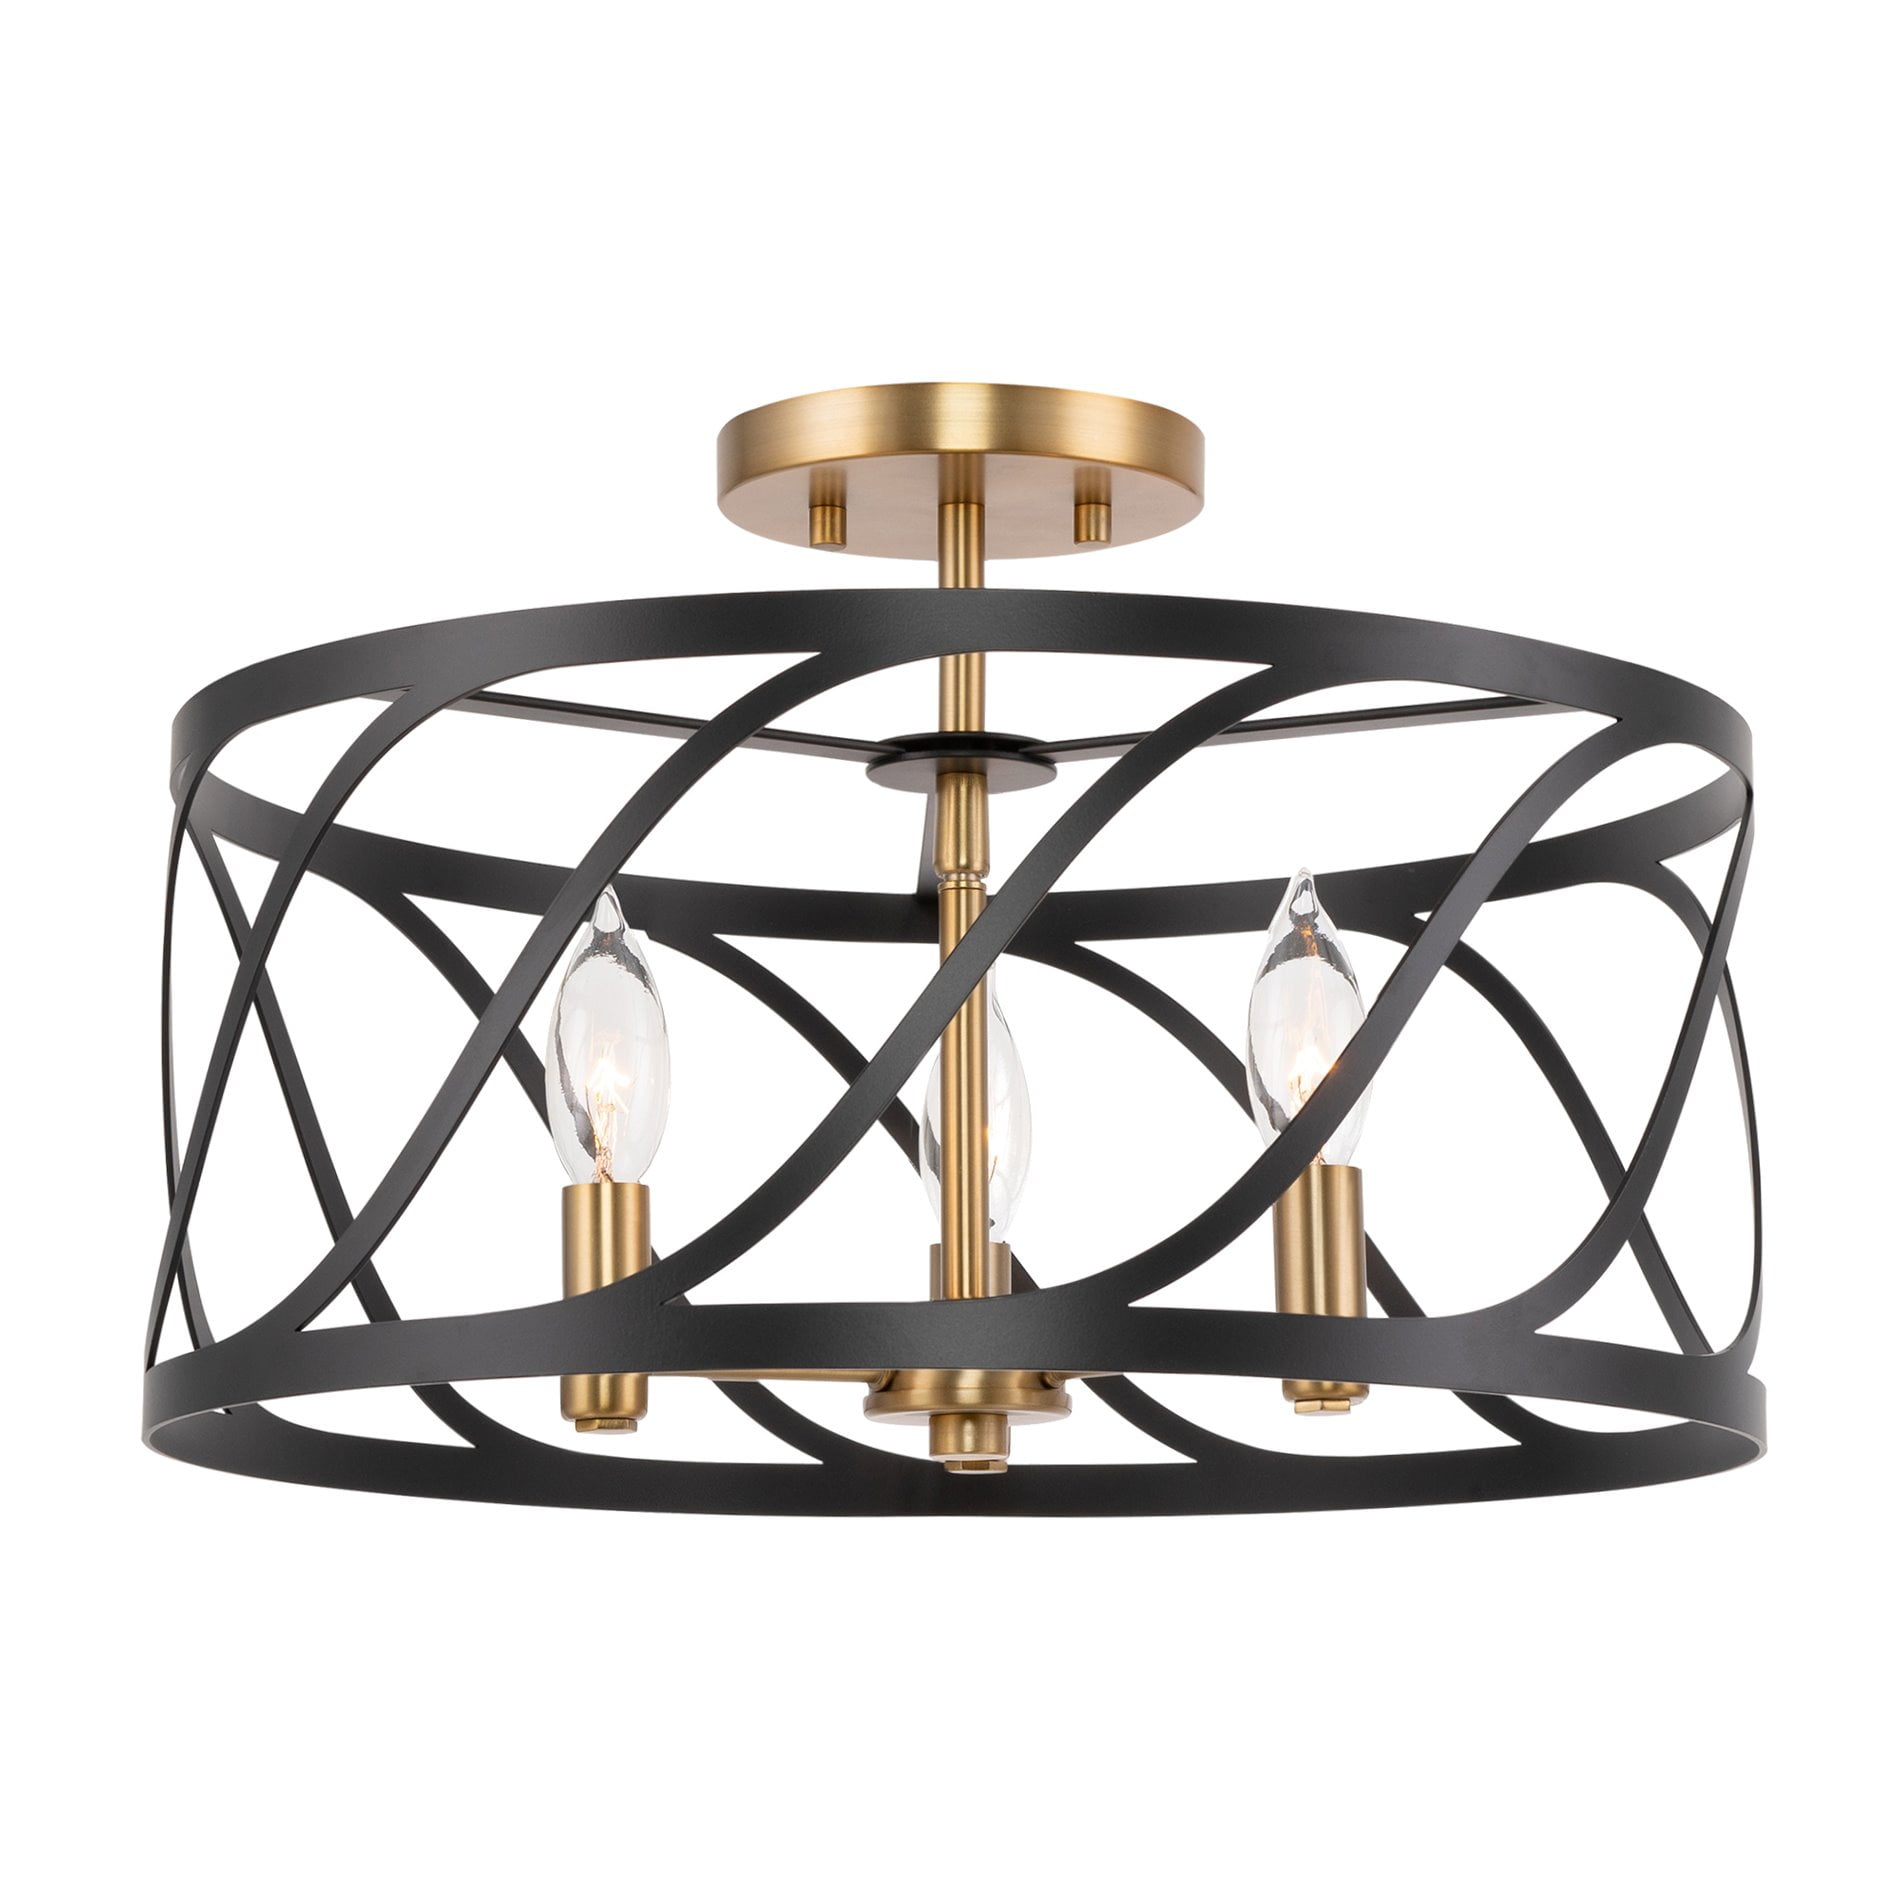 Antique Brass Accents Oil-Rubbed Bronze Finish LED Compatible Kira Home Zurich 12 Rustic Semi-Flush Mount Ceiling Light w/Glass Shade